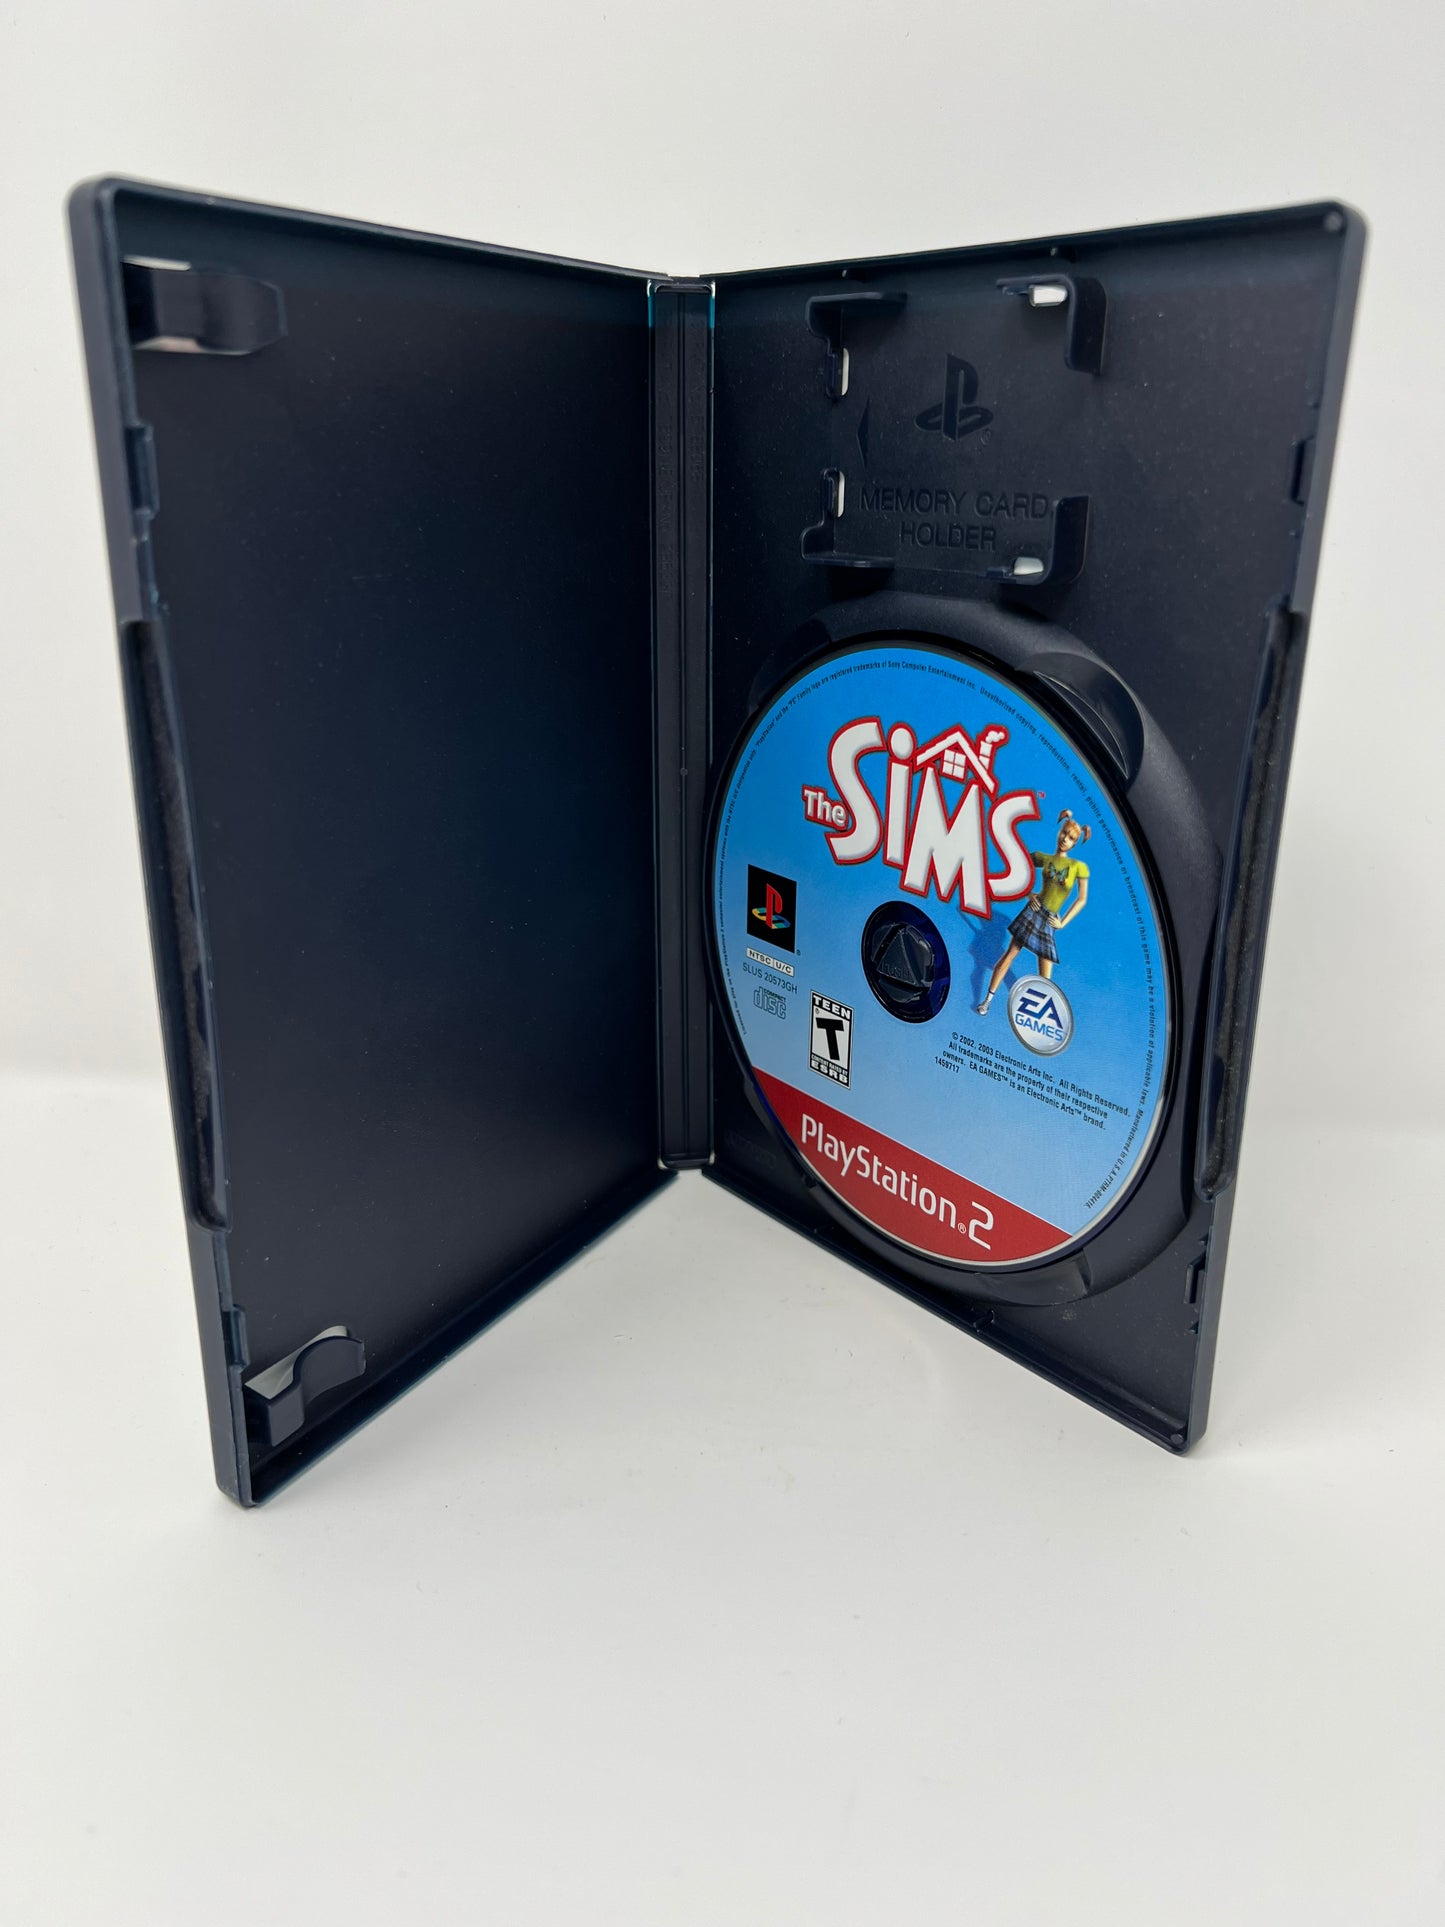 The Sims - PS2 Game - Used